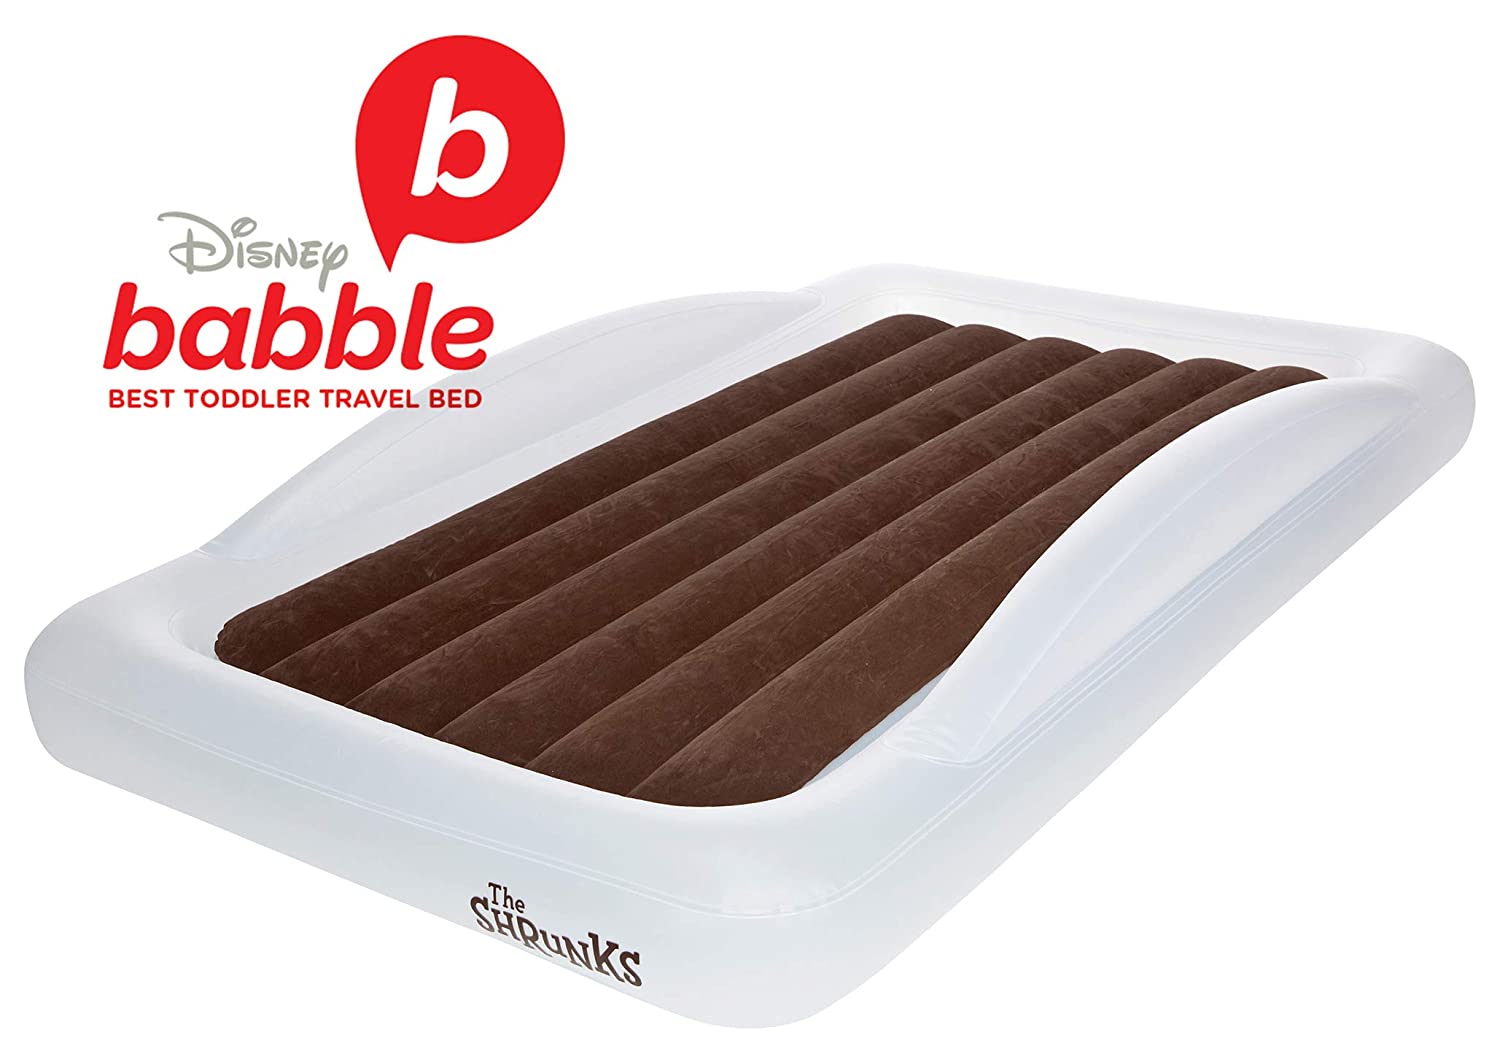 The Shrunks travel bed for toddler Portable Inflatable Air Mattress Bed